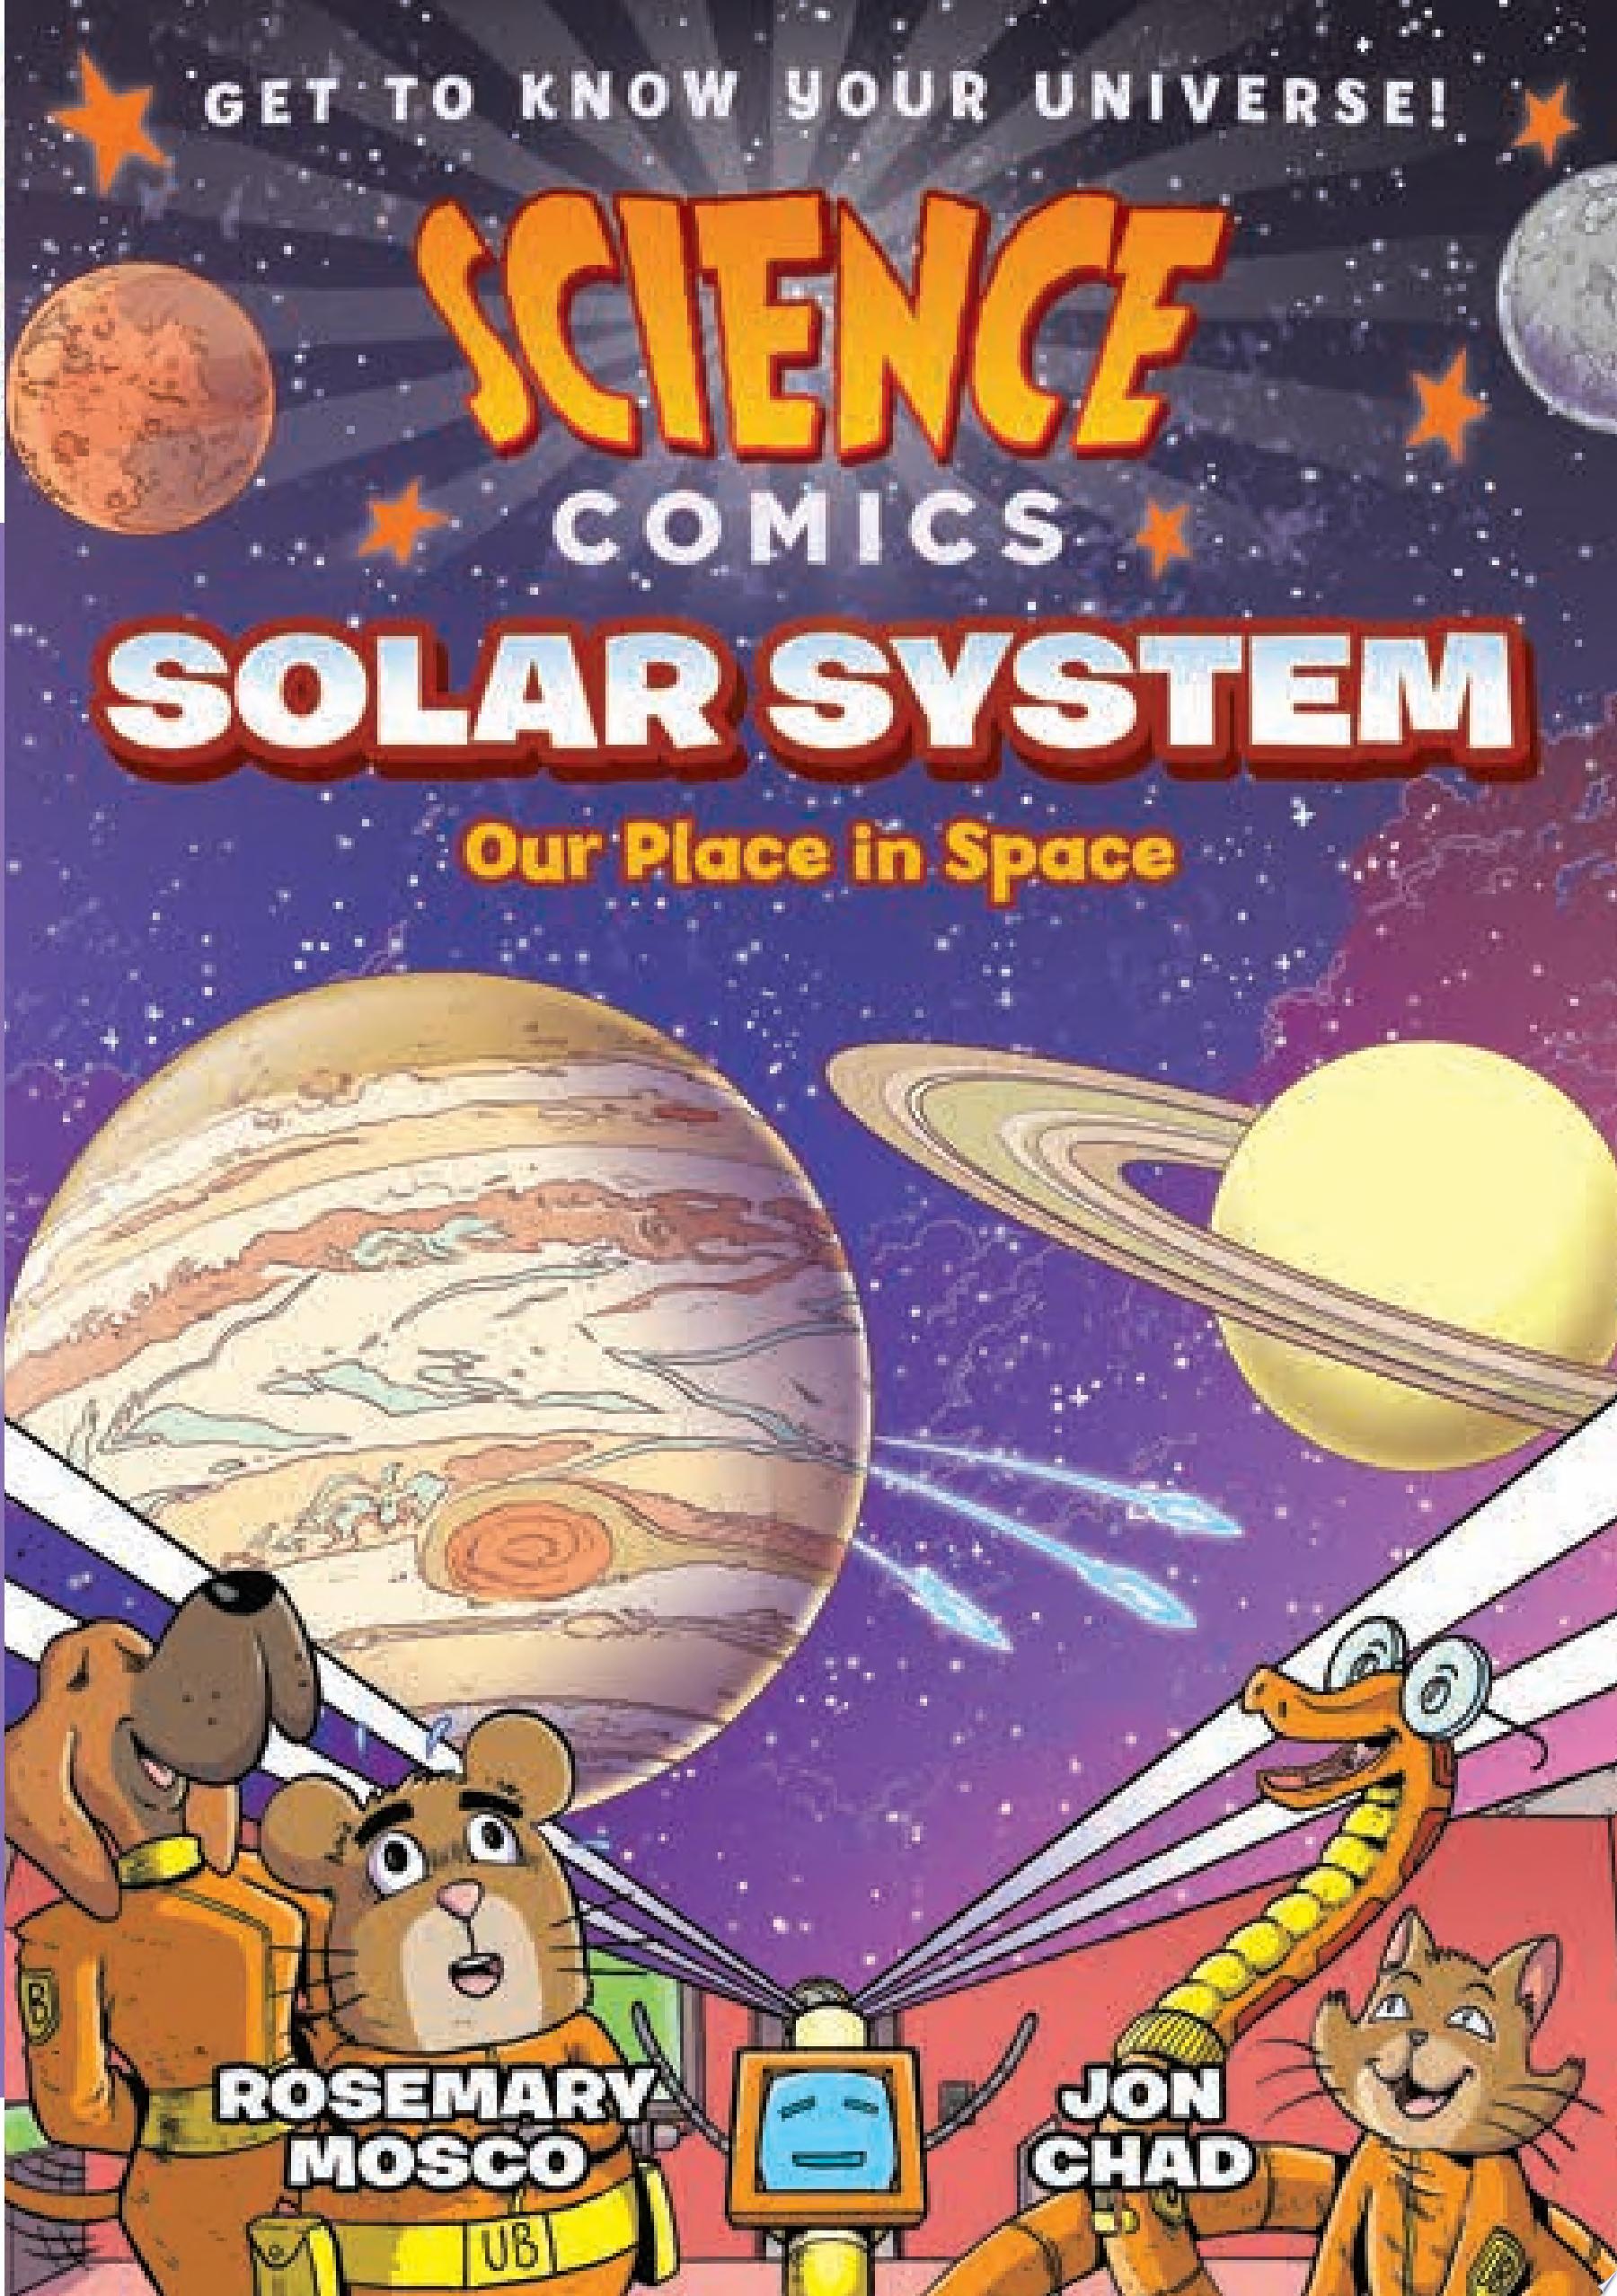 Image for "Science Comics: Solar System"